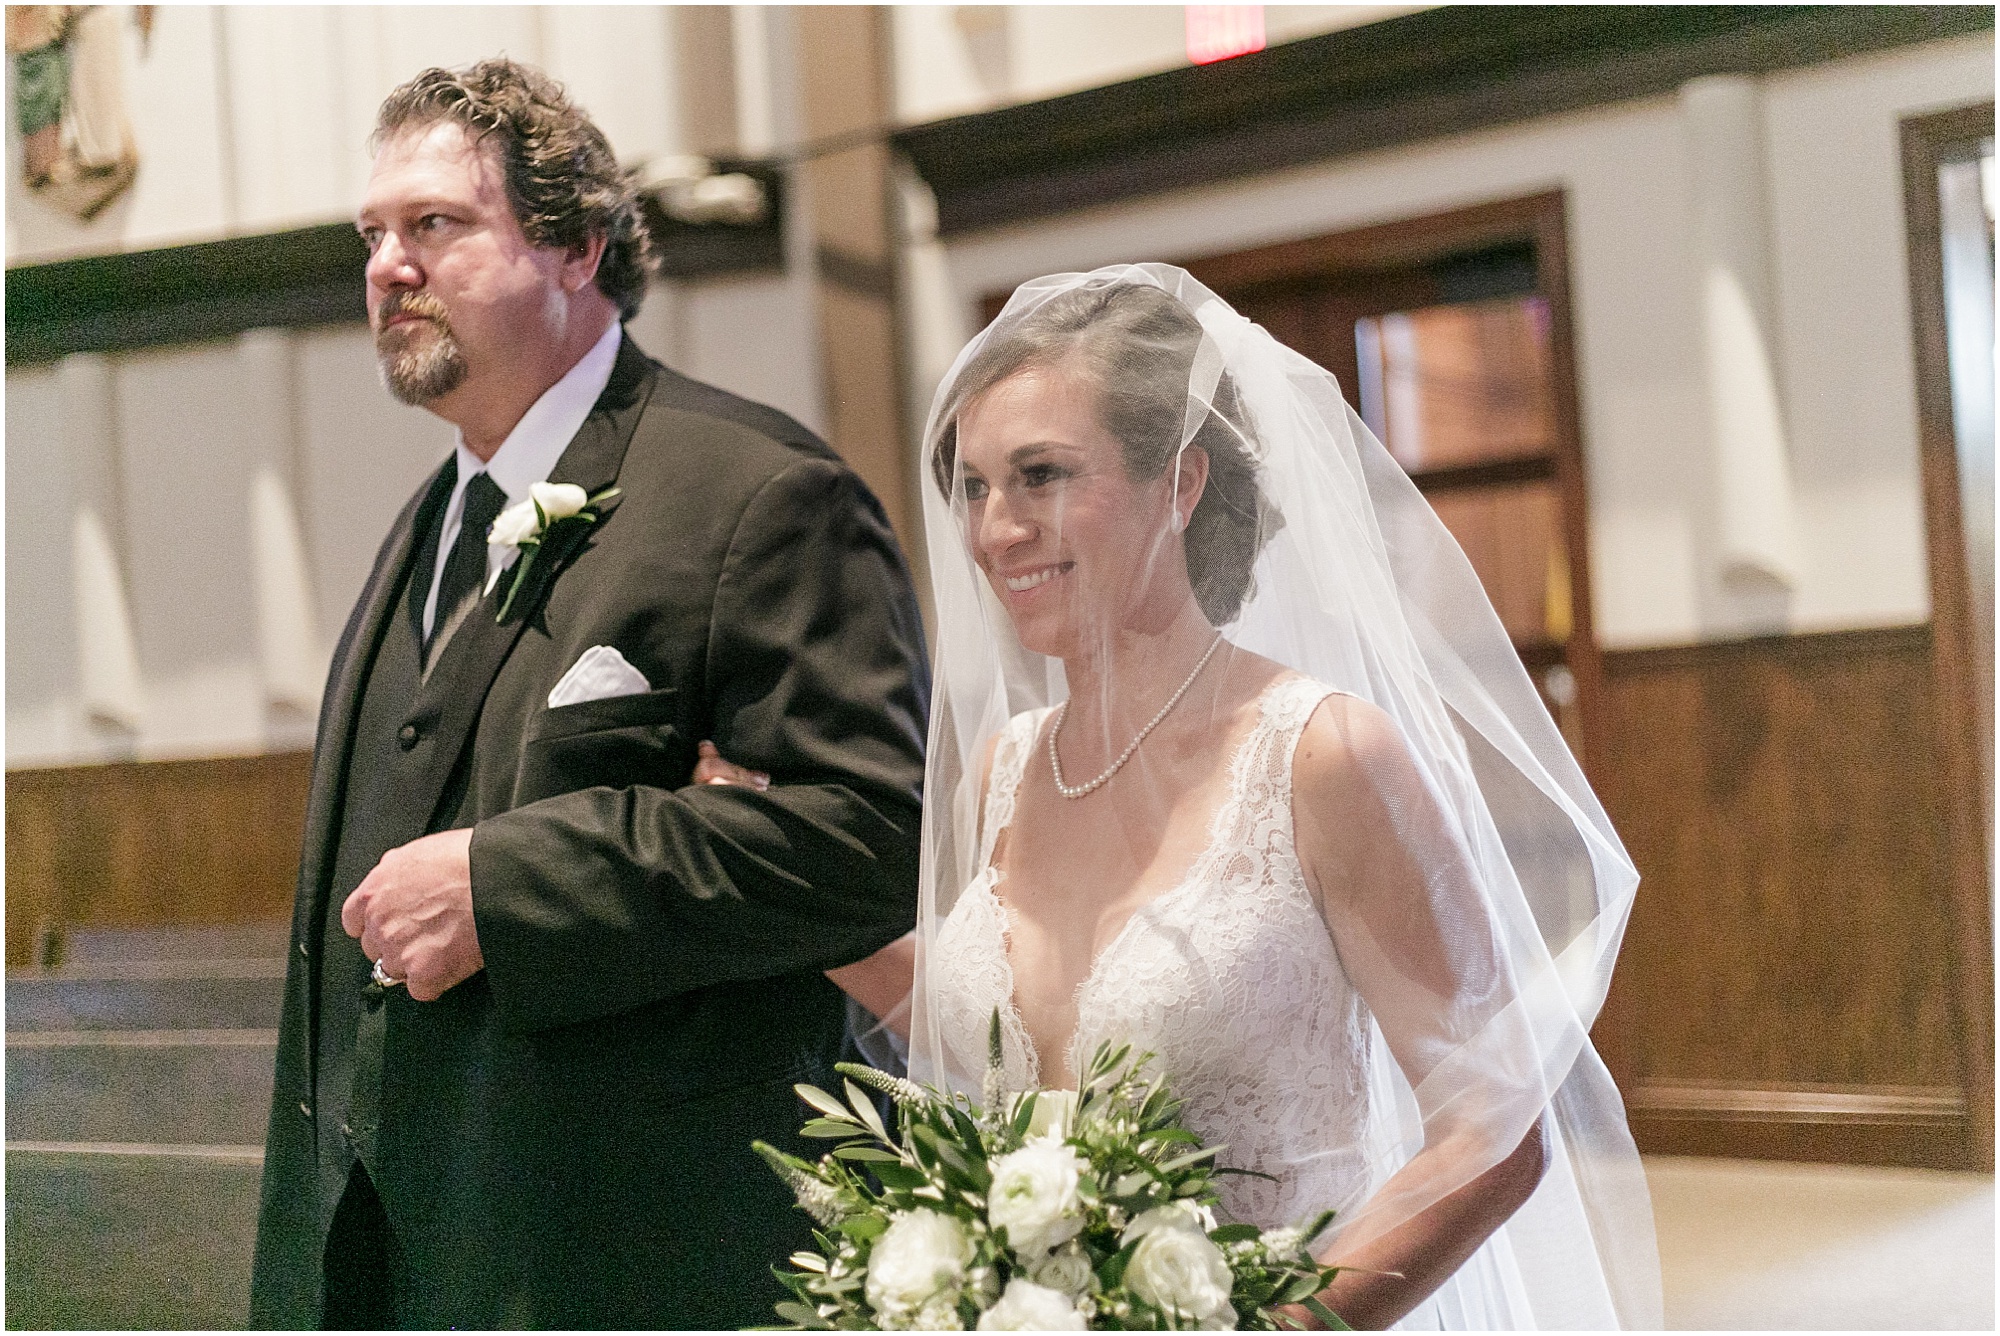 Bride walks with her father at her wedding.